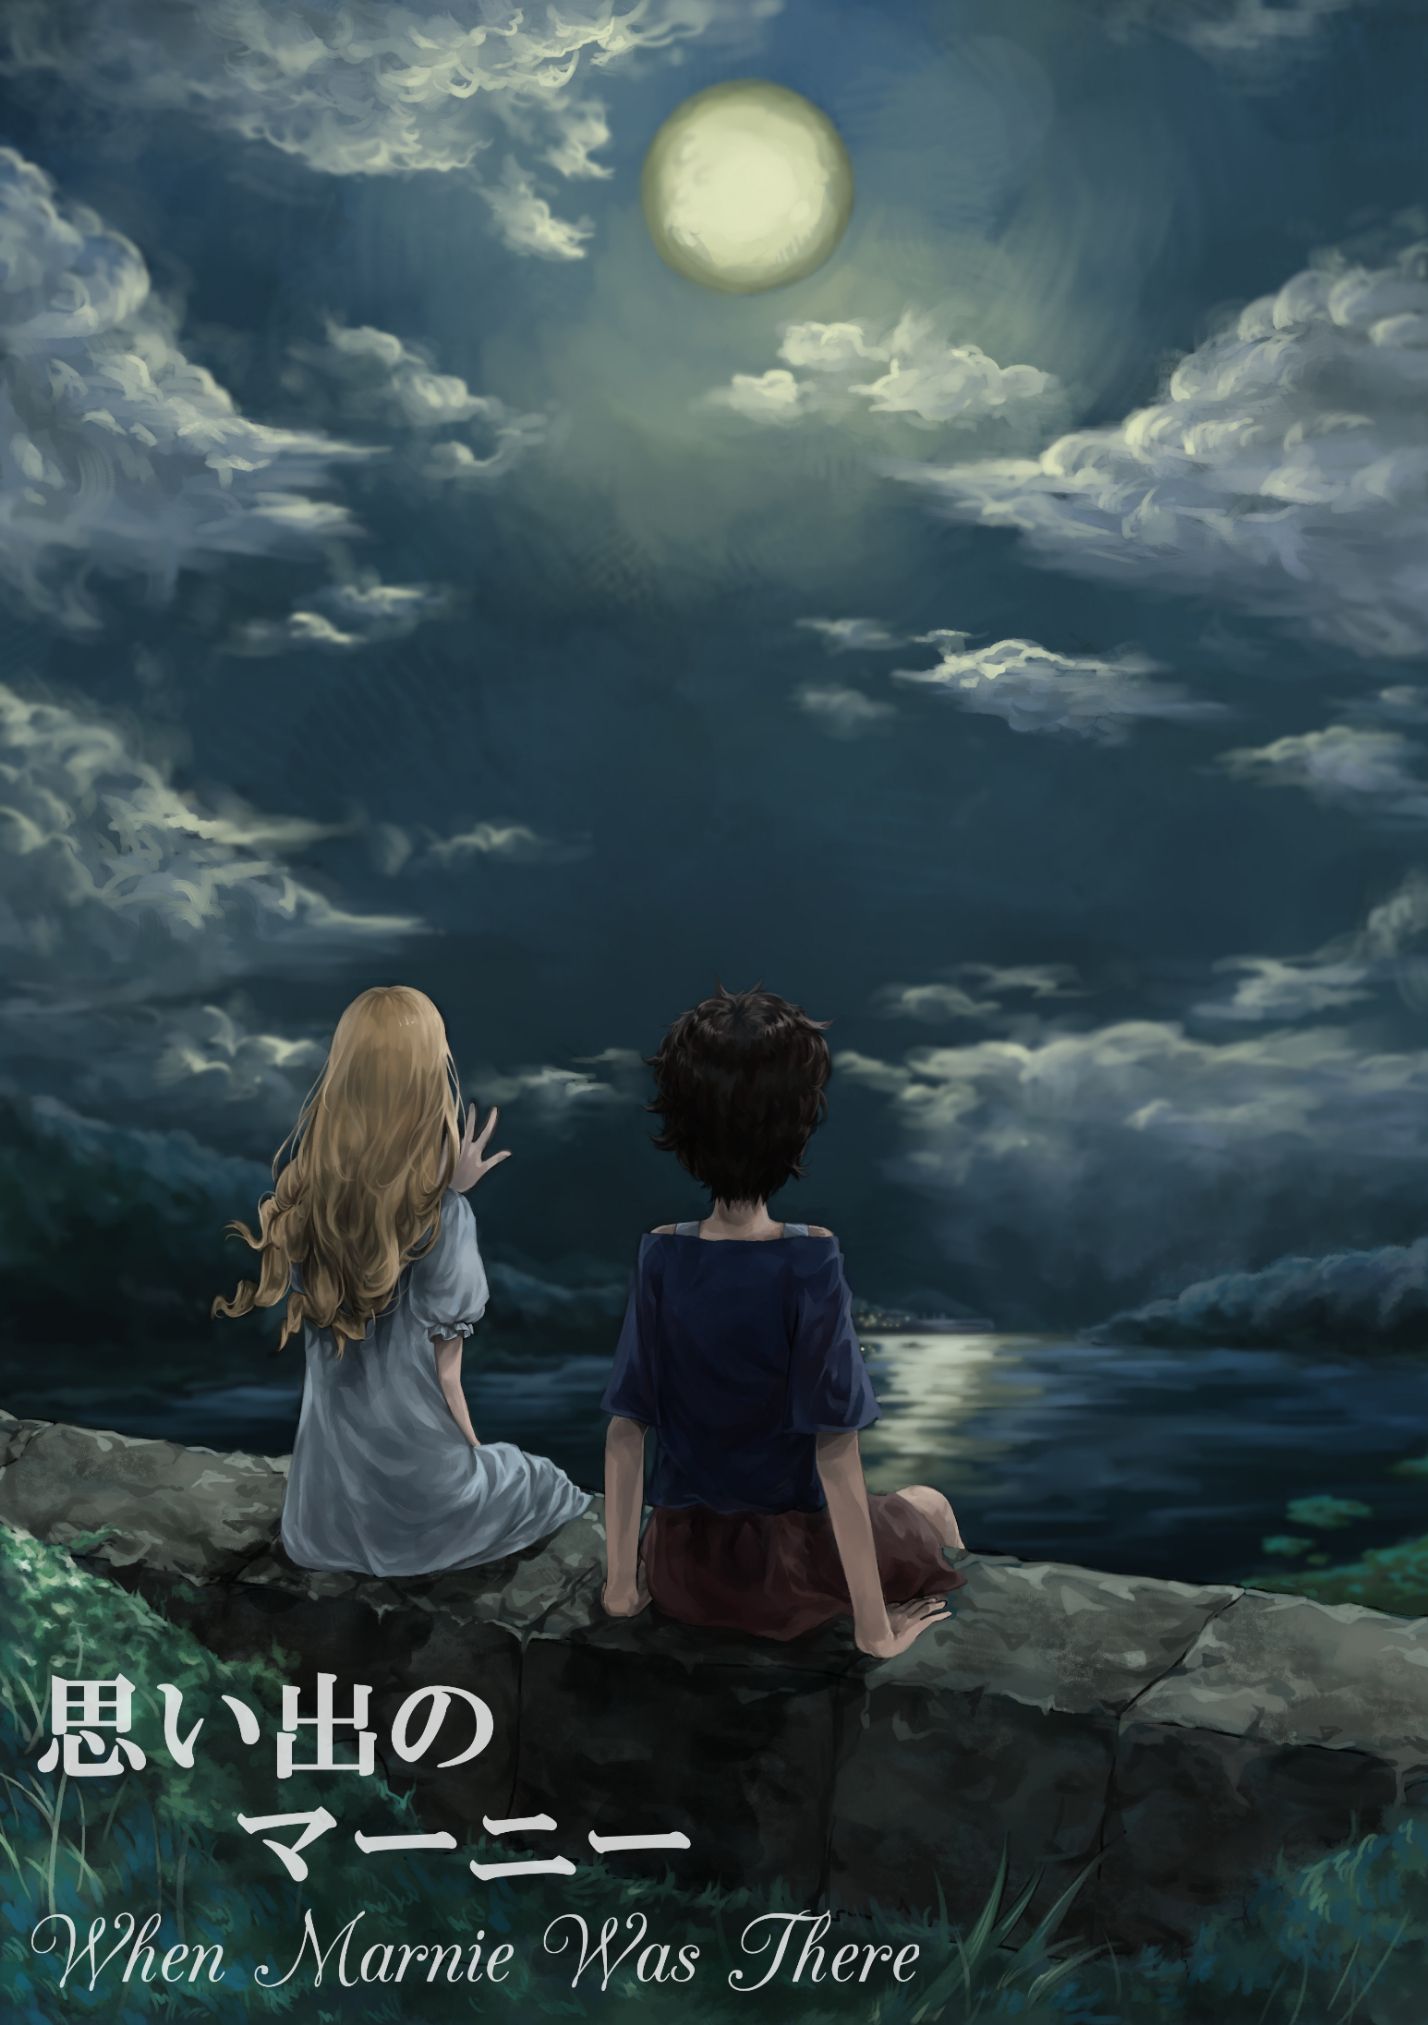 Omoide no Marnie (When Marnie Was There) Anime Image Board